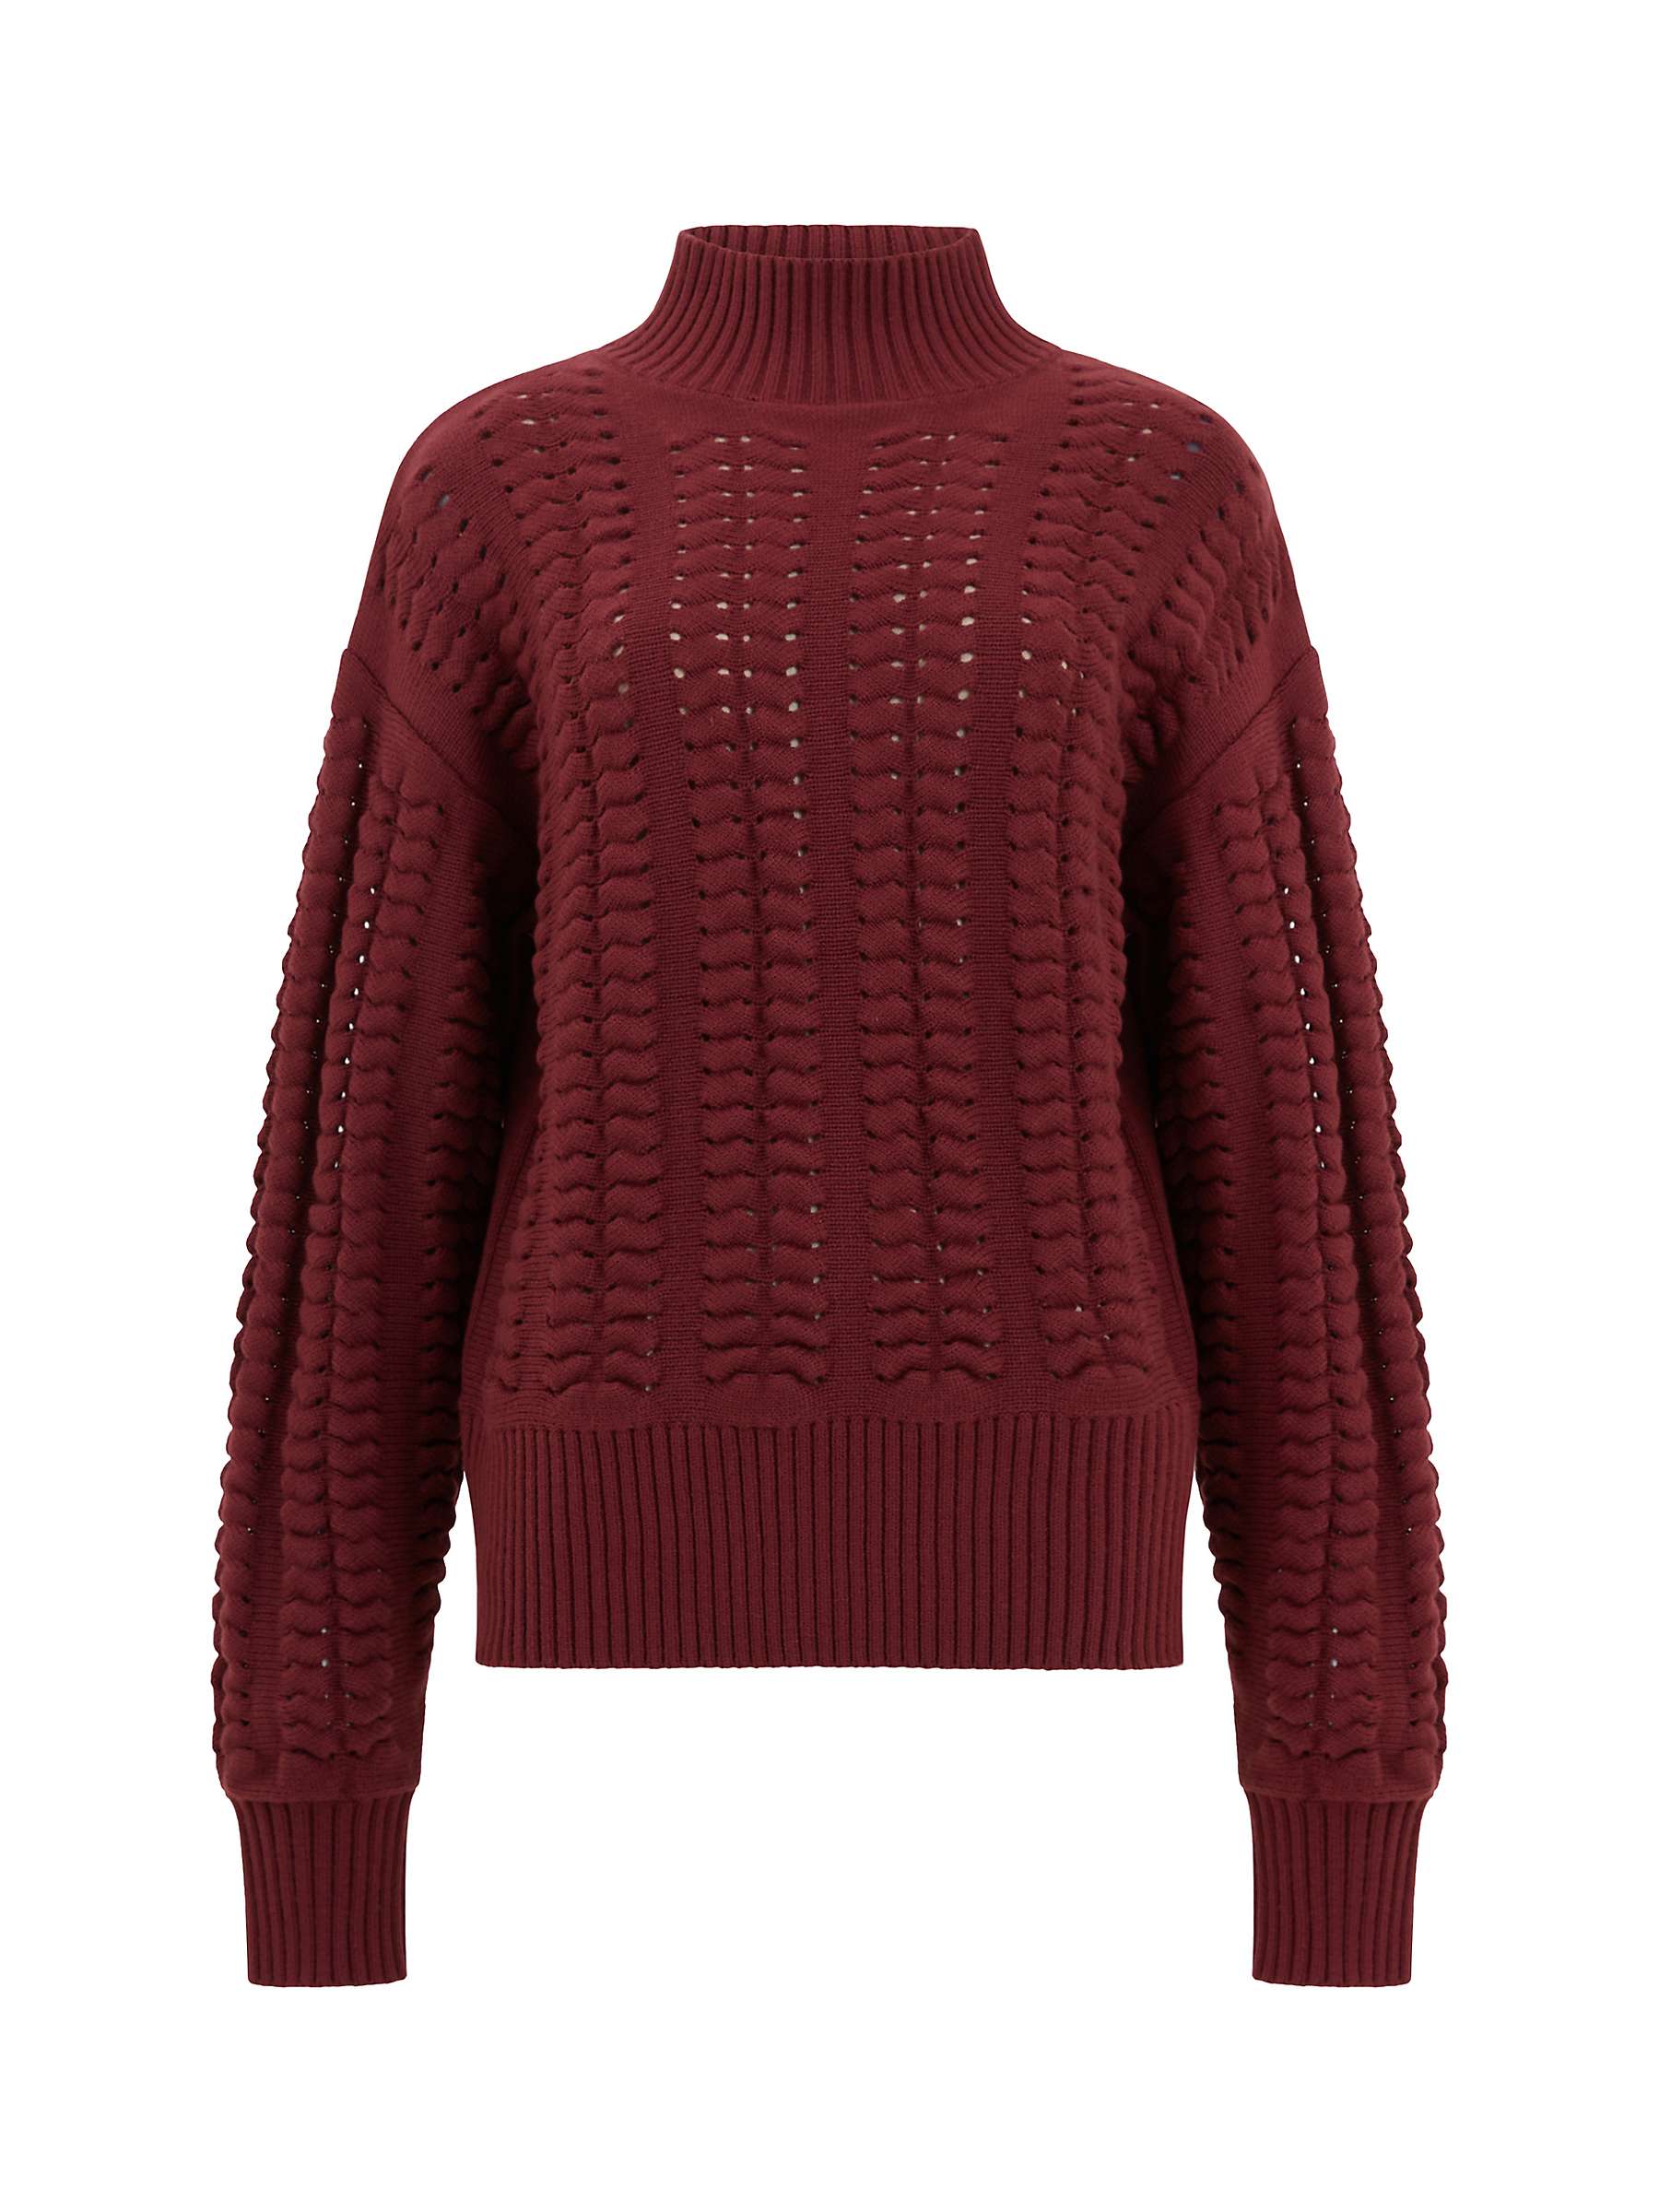 French Connection Jolee Jumper, Chocolate Truffle at John Lewis & Partners